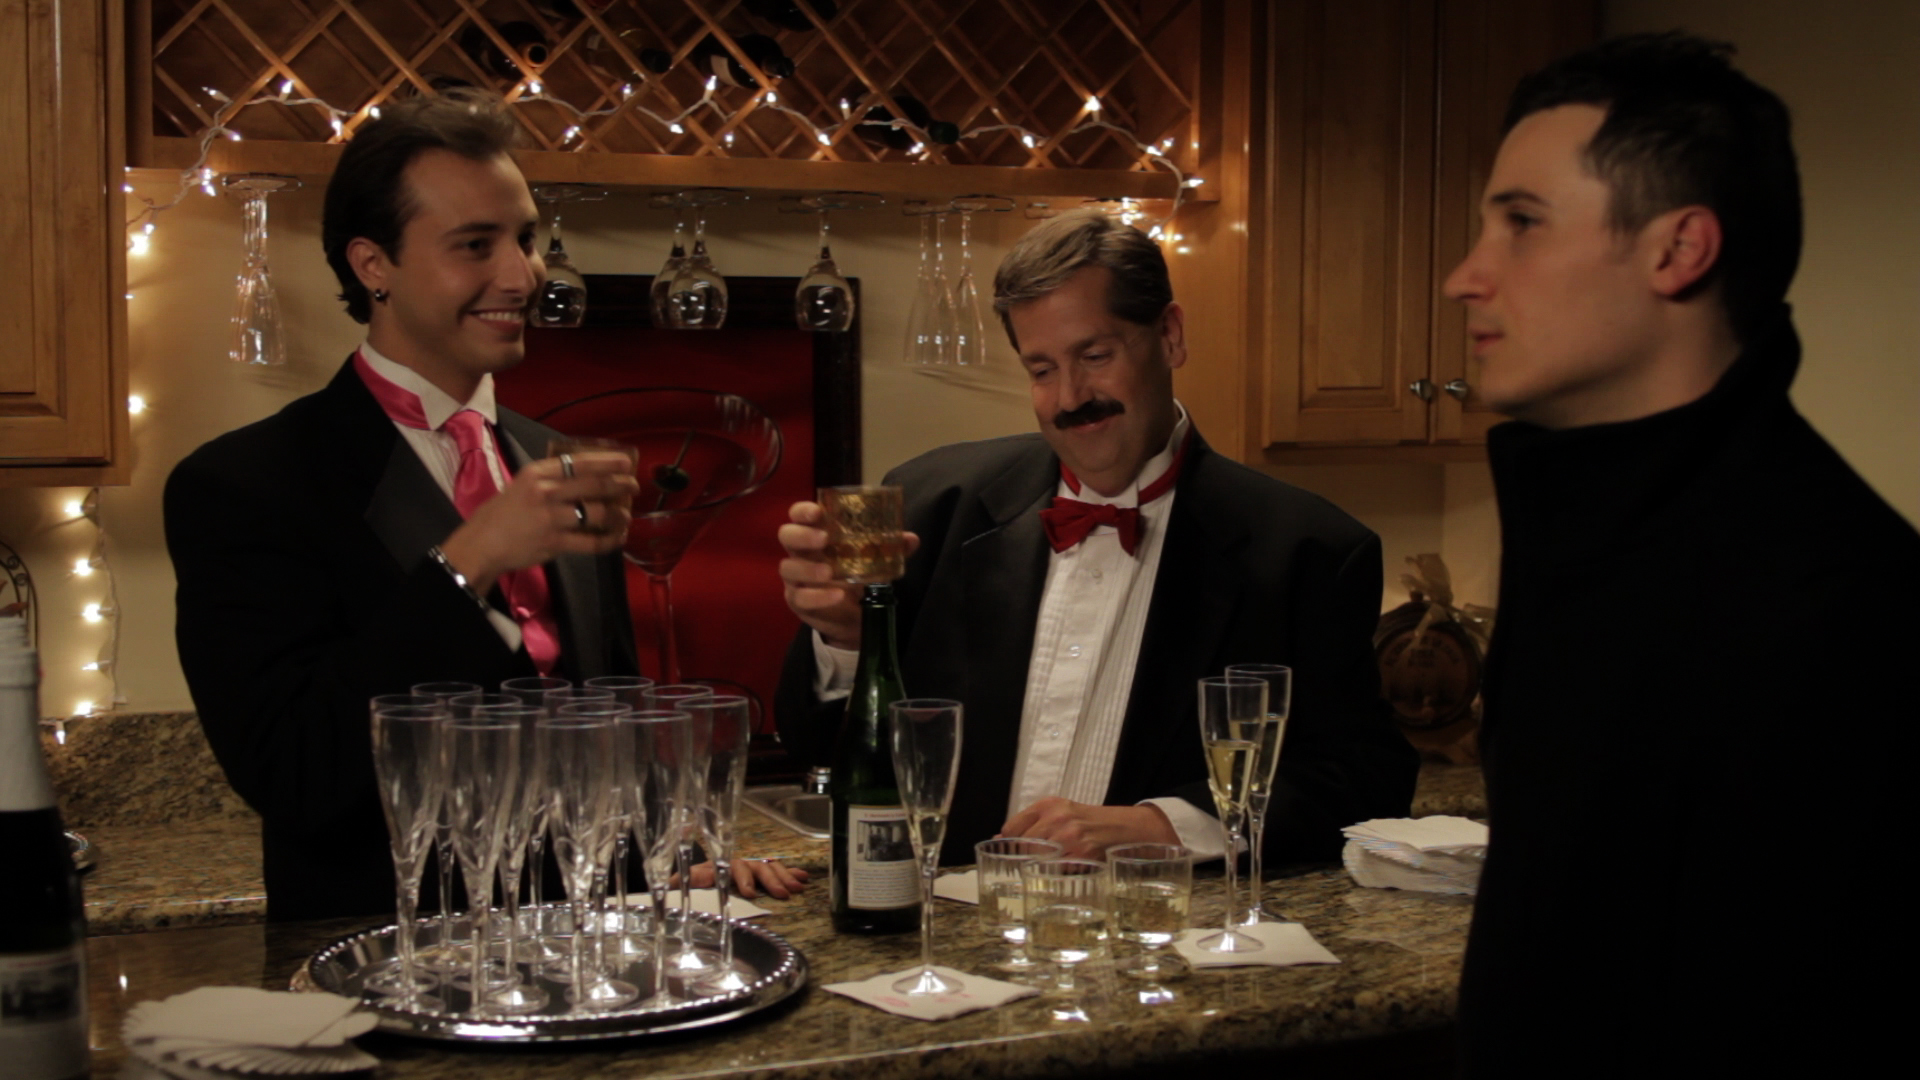 Still of Eddy Salazar (Will Hart), Tom Tangen (Maxie Maxwell) and Andre Agazaryan (Dirk) in The Extra